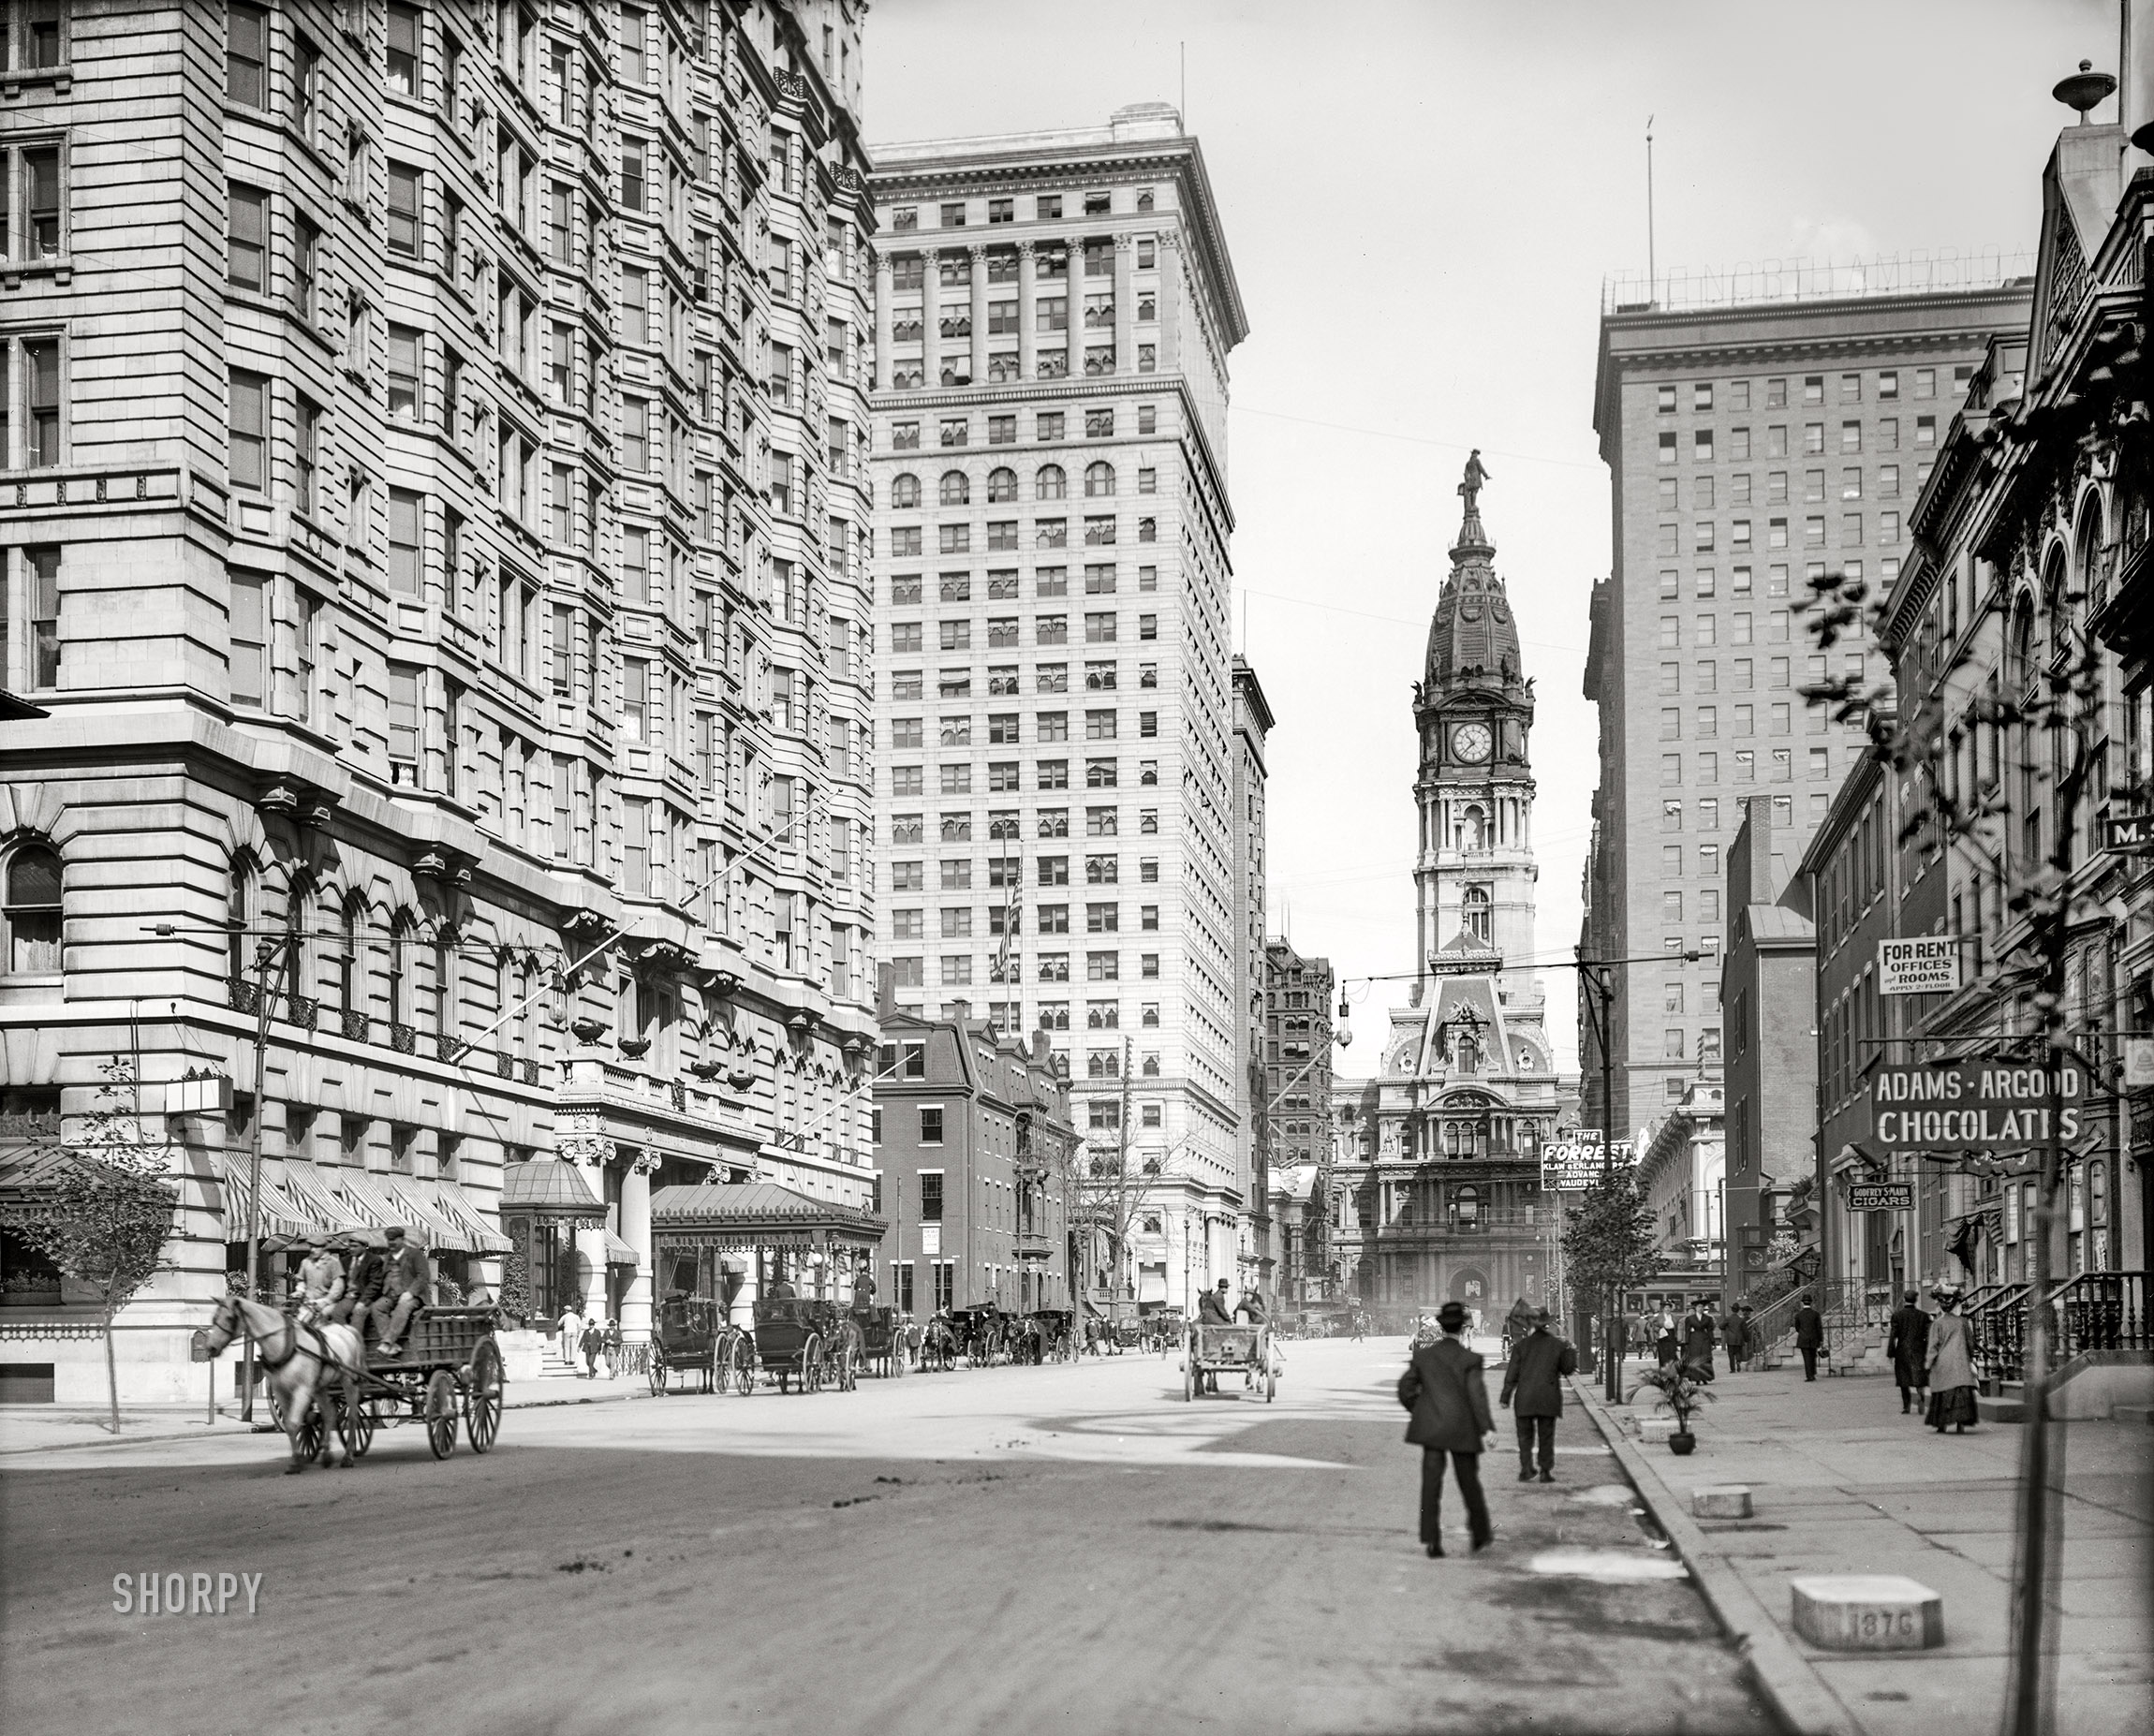 Philadelphia circa 1907. "Broad Street north from Locust." With views of the Bellevue-Stratford Hotel, Land Title Trust Building and City Hall. 8x10 inch glass negative. View full size.